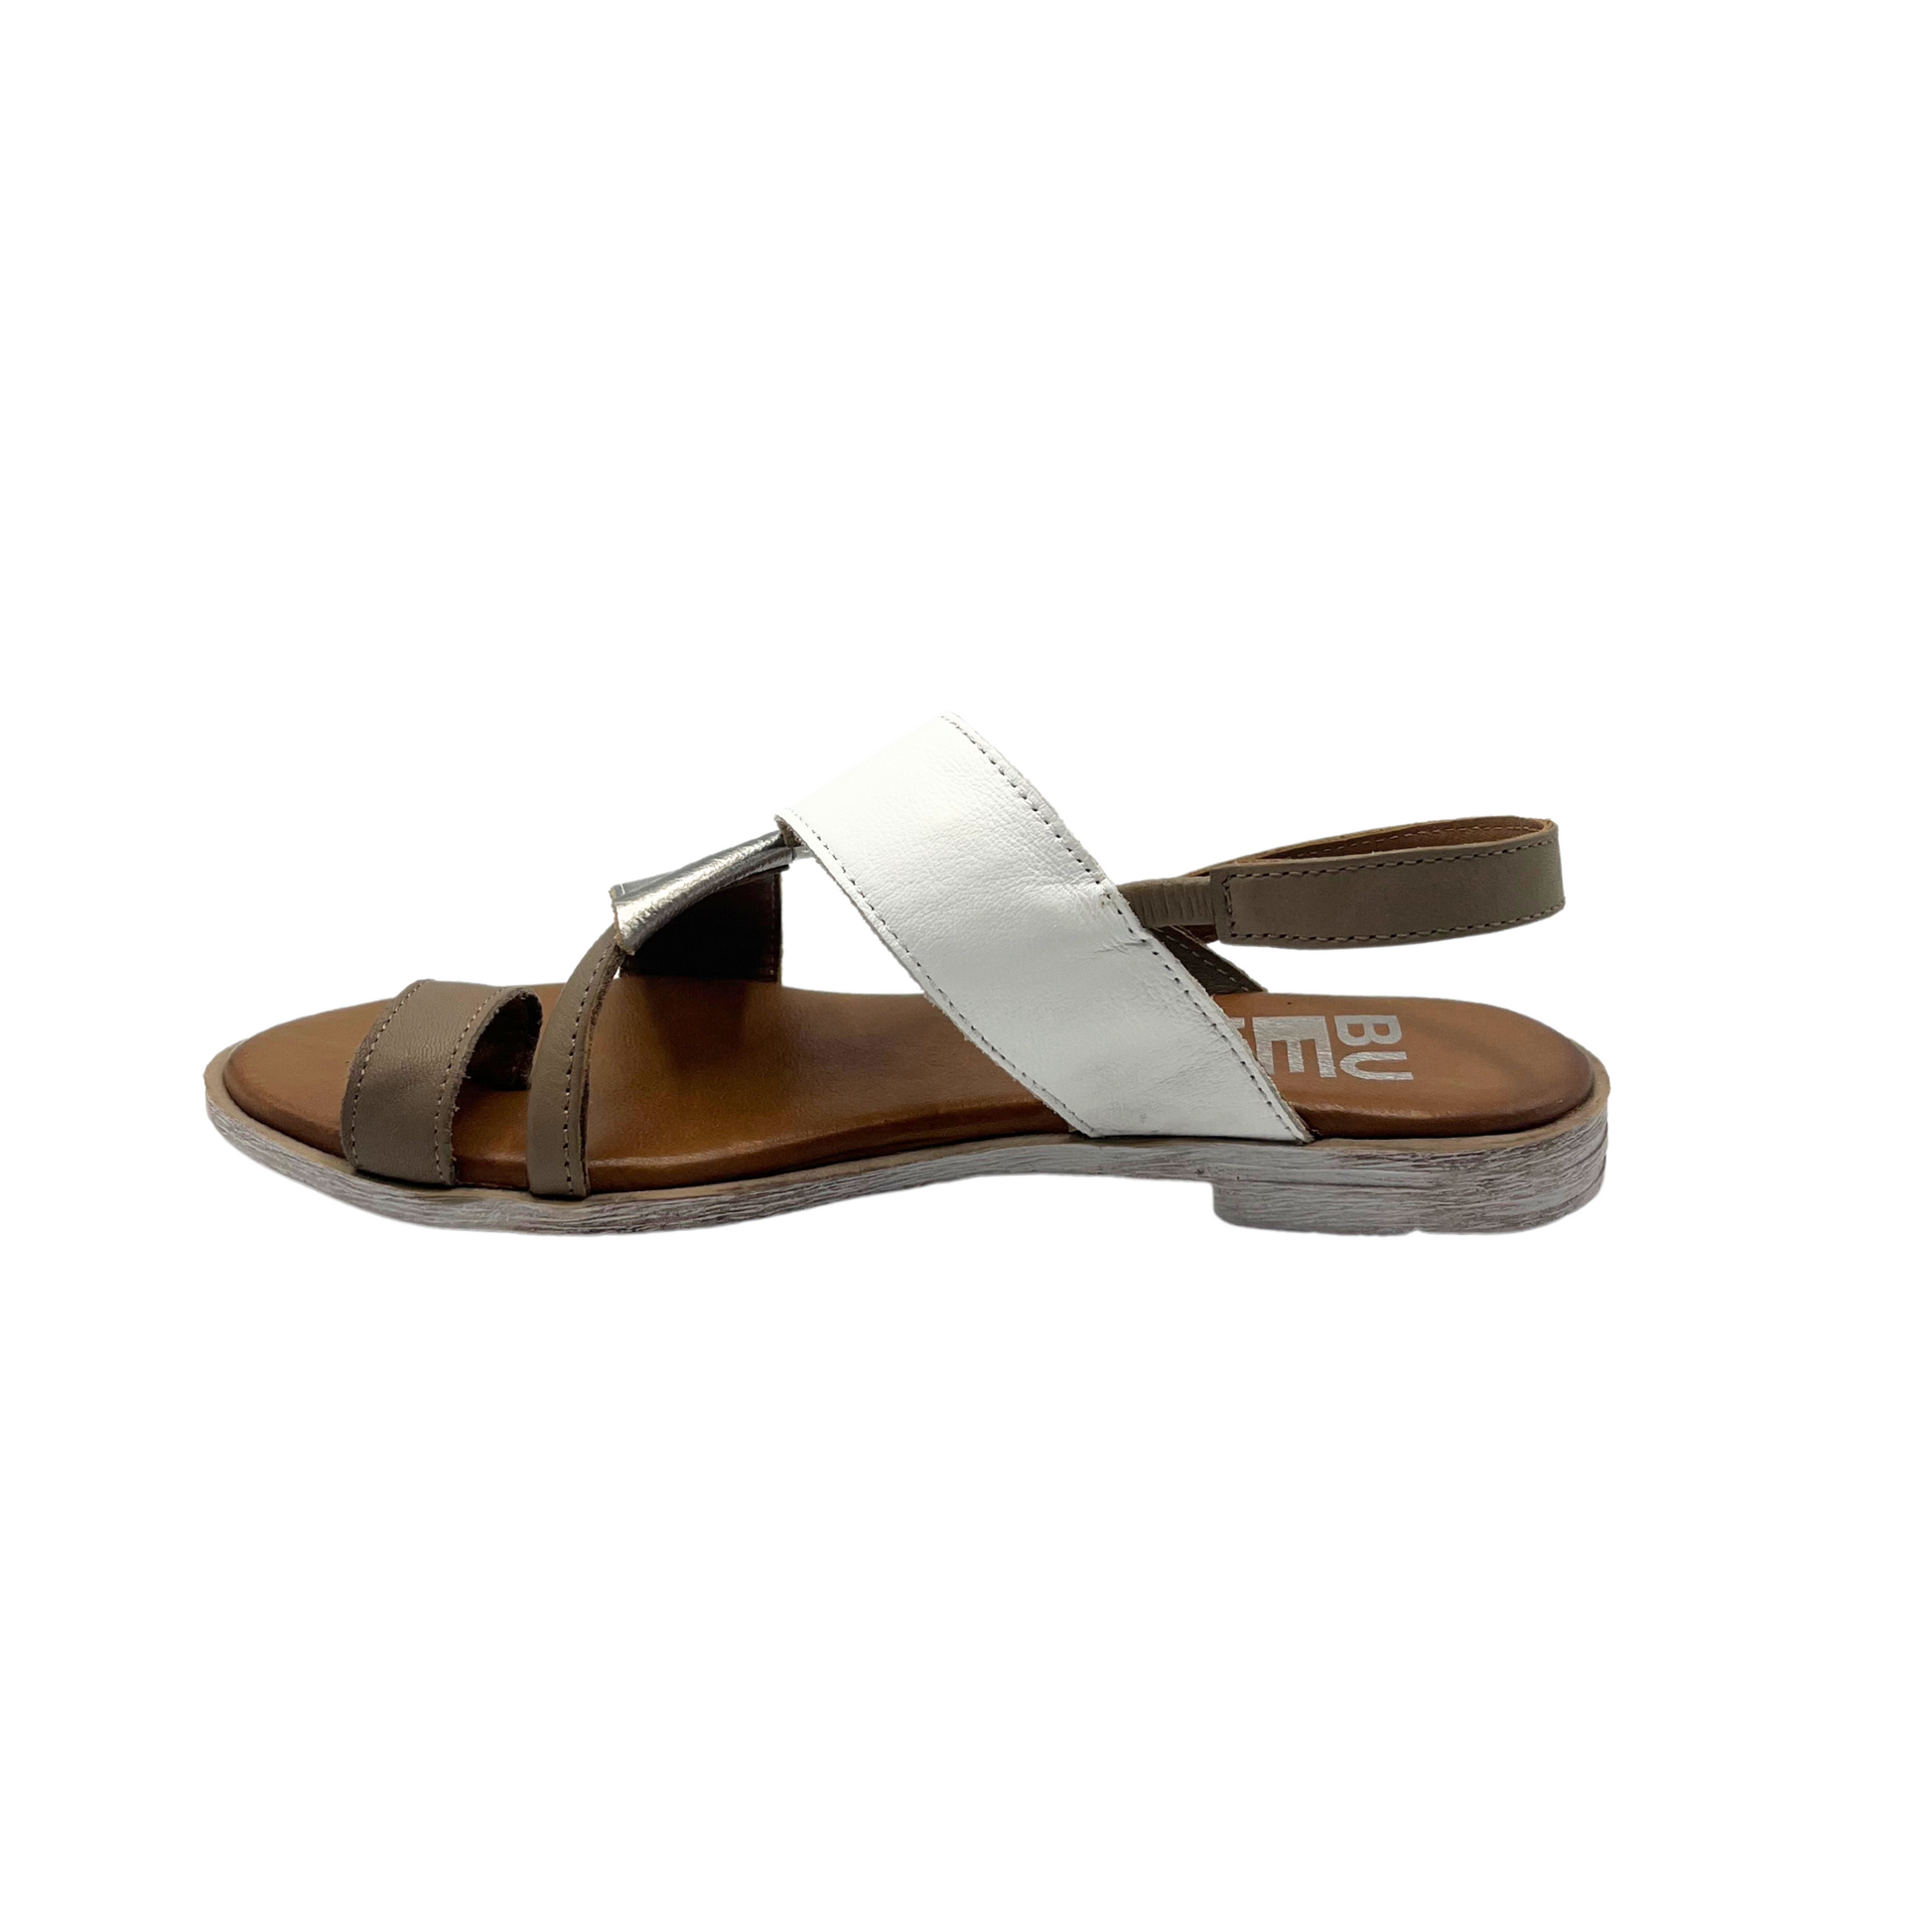 Inside view of a slip on style sandal shown in a white combo leather.  Flat with toe lopp at front.  Straps across top and midfoot as well as heel